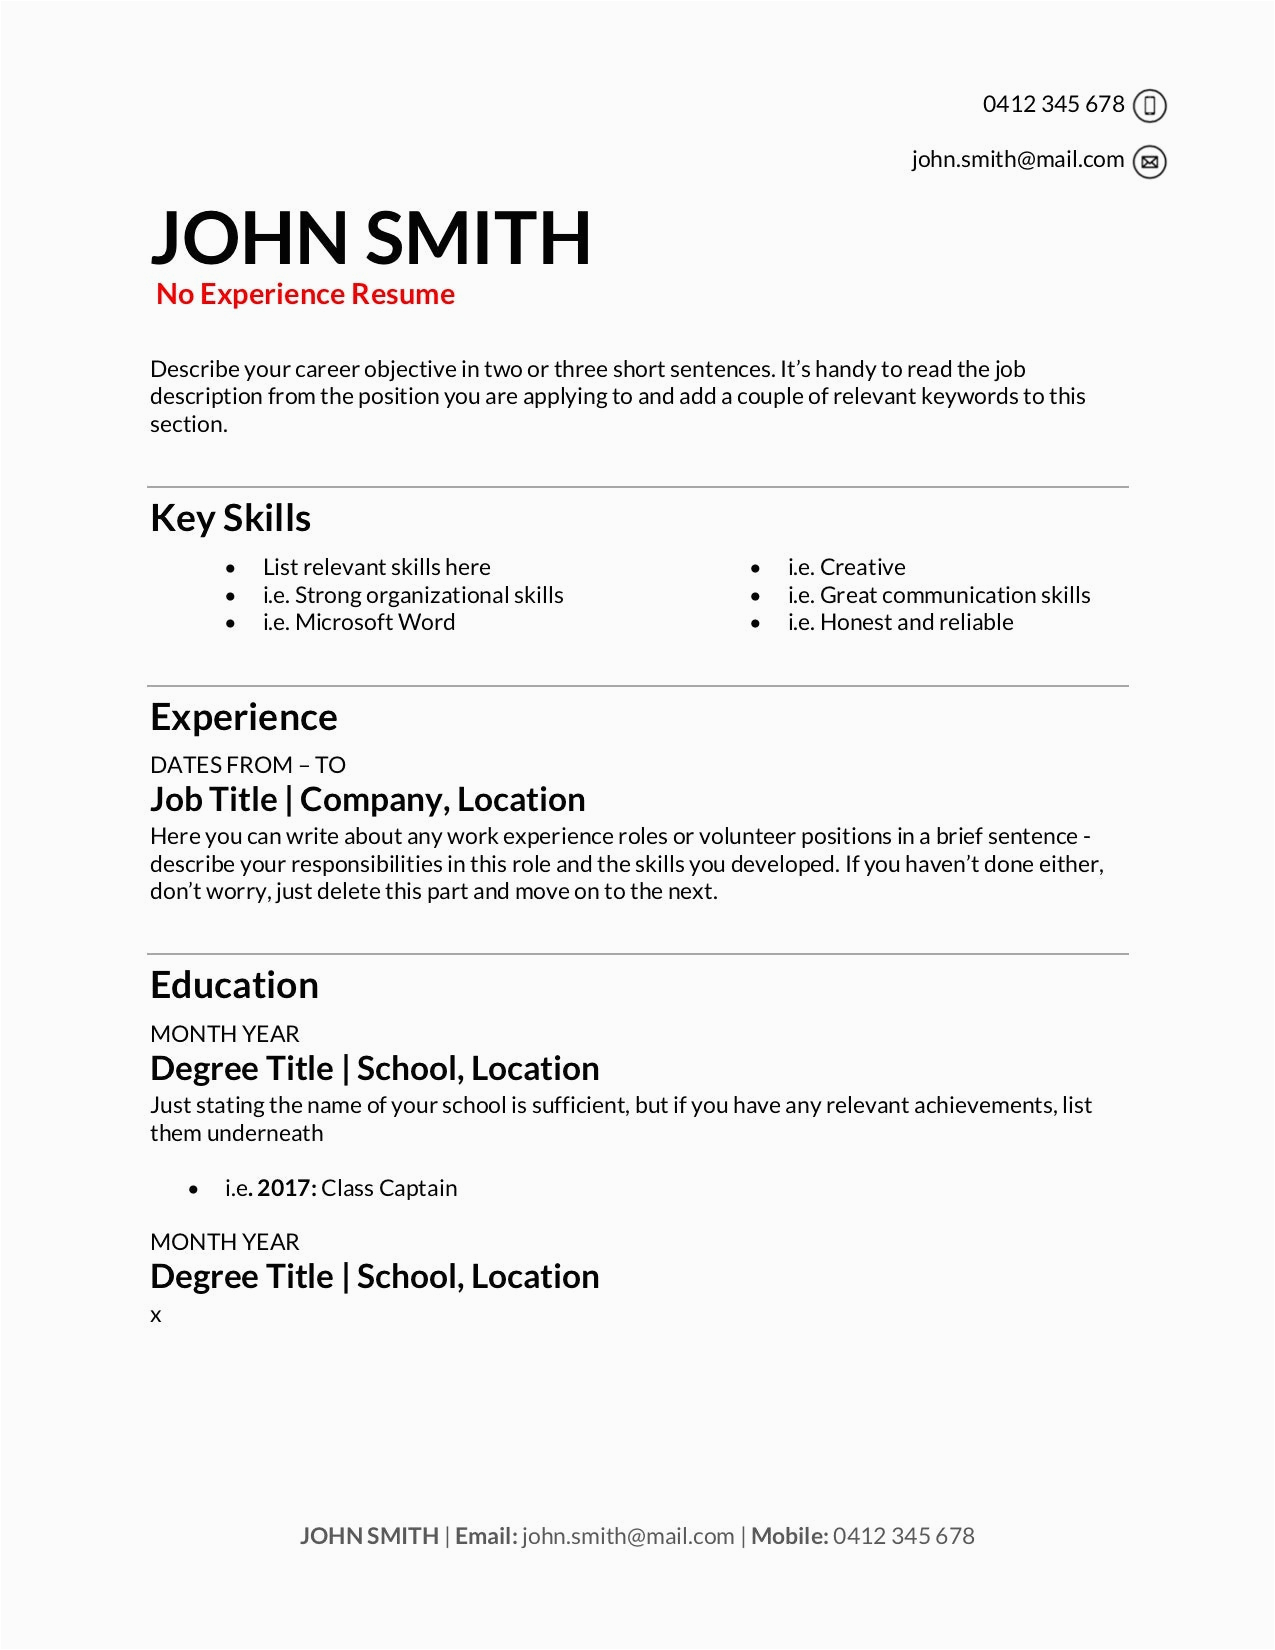 resume examples for any job